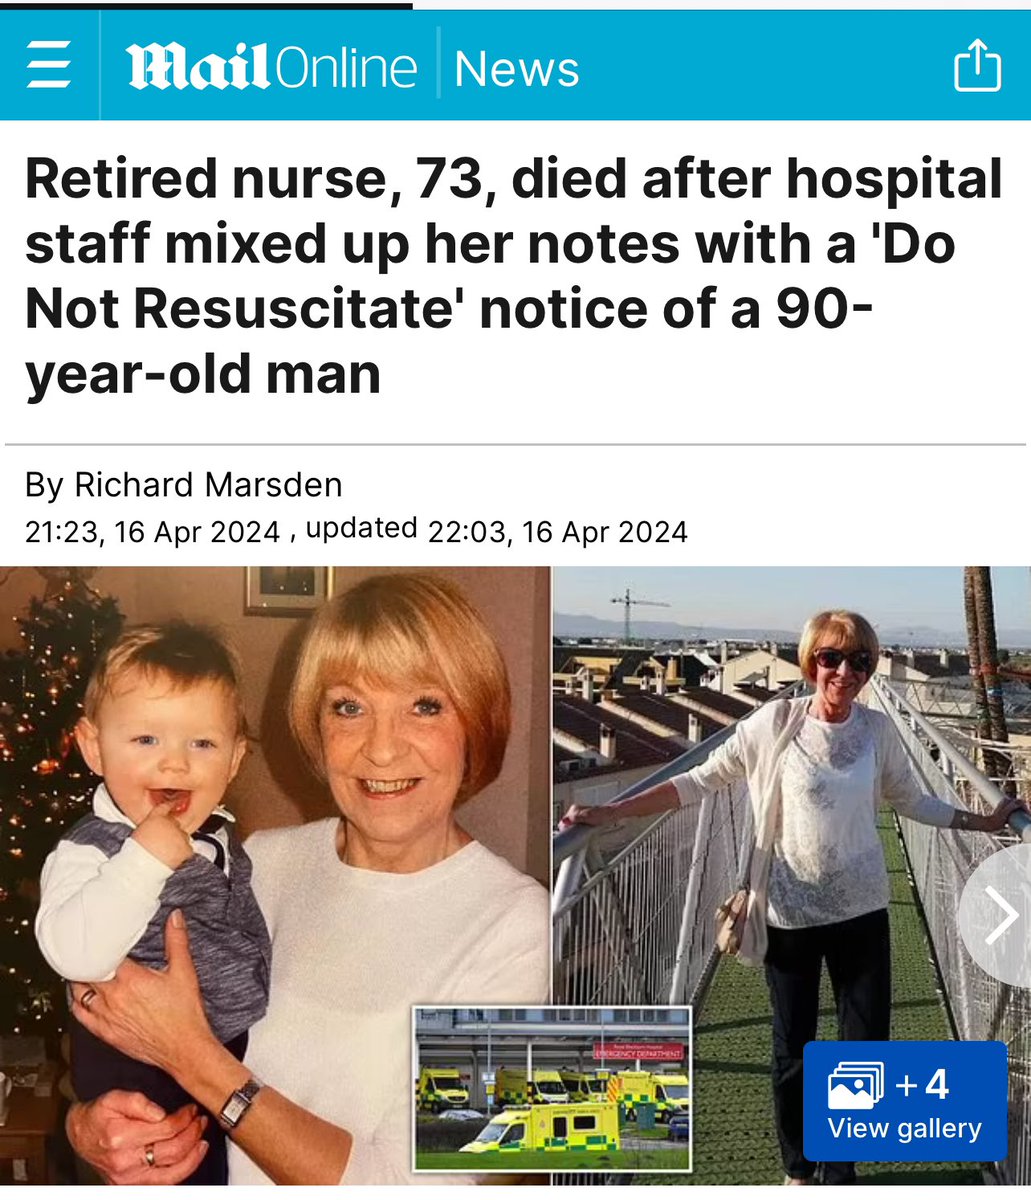 Retired Nurse Pat Dawson 73, died after hospital staff mixed up notes with a 90-year-old man with DNR notice dailymail.co.uk/news/article-1…